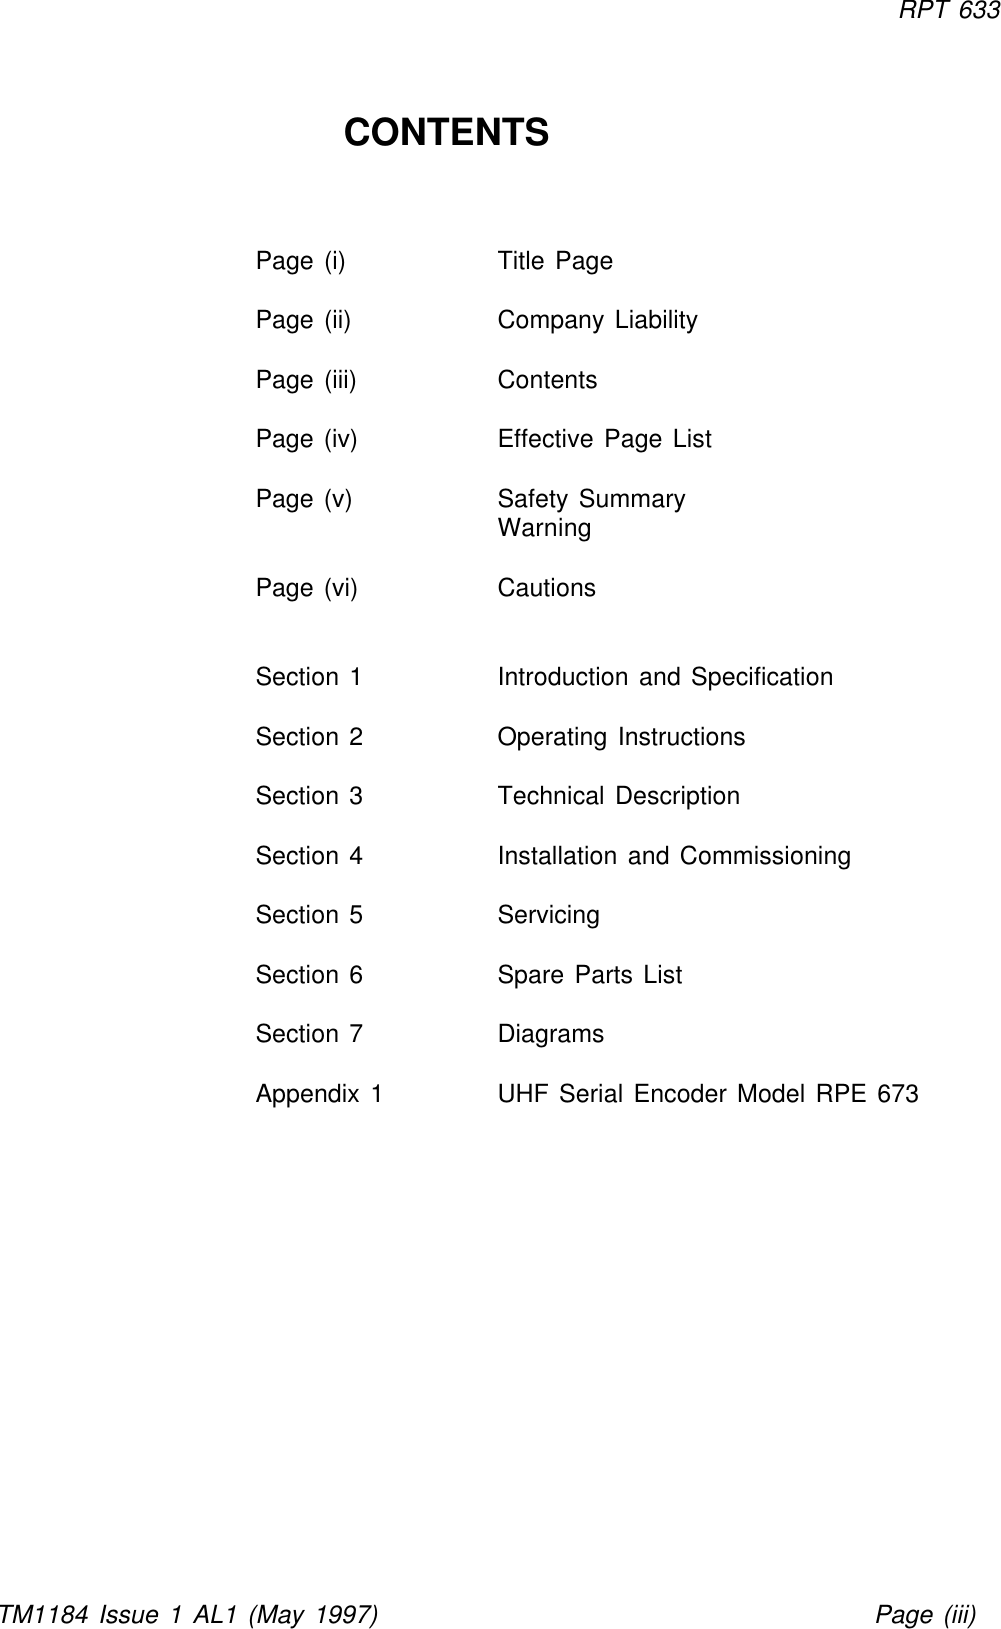 RPT 633TM1184 Issue 1 AL1 (May 1997) Page (iii)CONTENTS          Page (i) Title PagePage (ii) Company LiabilityPage (iii) ContentsPage (iv) Effective Page ListPage (v) Safety Summary WarningPage (vi) CautionsSection 1Introduction and SpecificationSection 2Operating InstructionsSection 3Technical DescriptionSection 4Installation and CommissioningSection 5ServicingSection 6Spare Parts ListSection 7DiagramsAppendix 1UHF Serial Encoder Model RPE 673